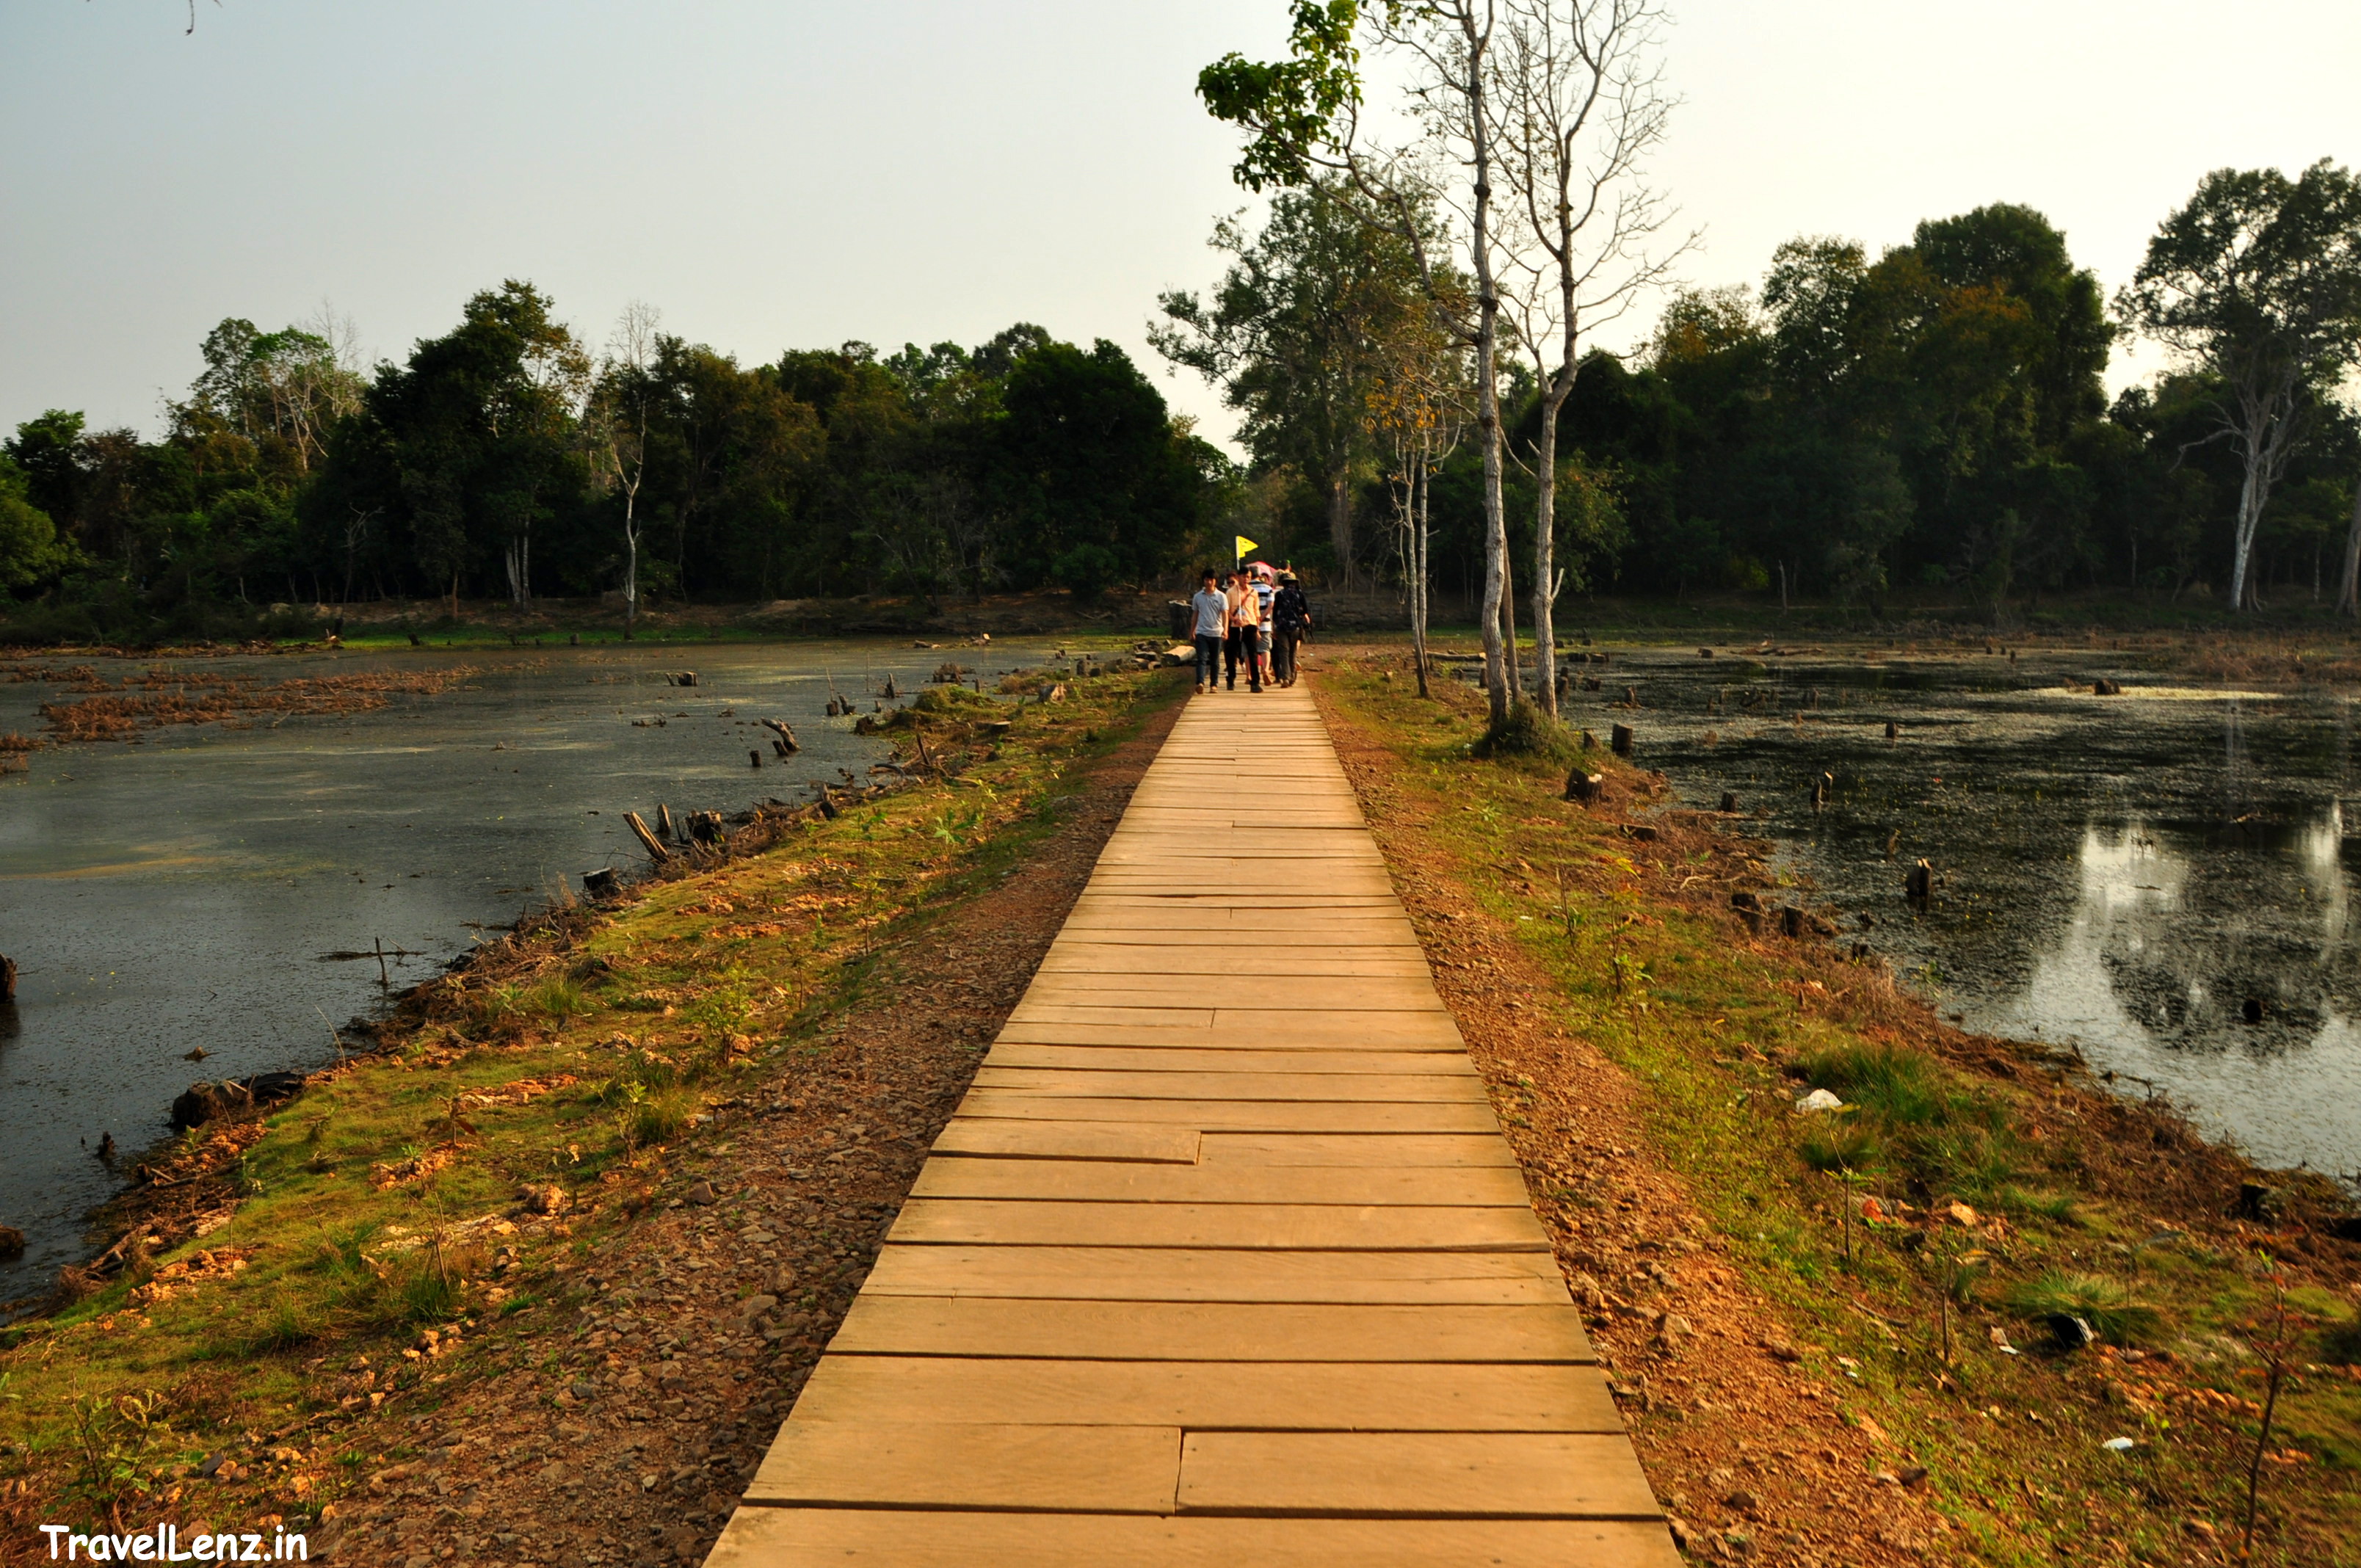 The wooden walkway cutting through Northern Baray